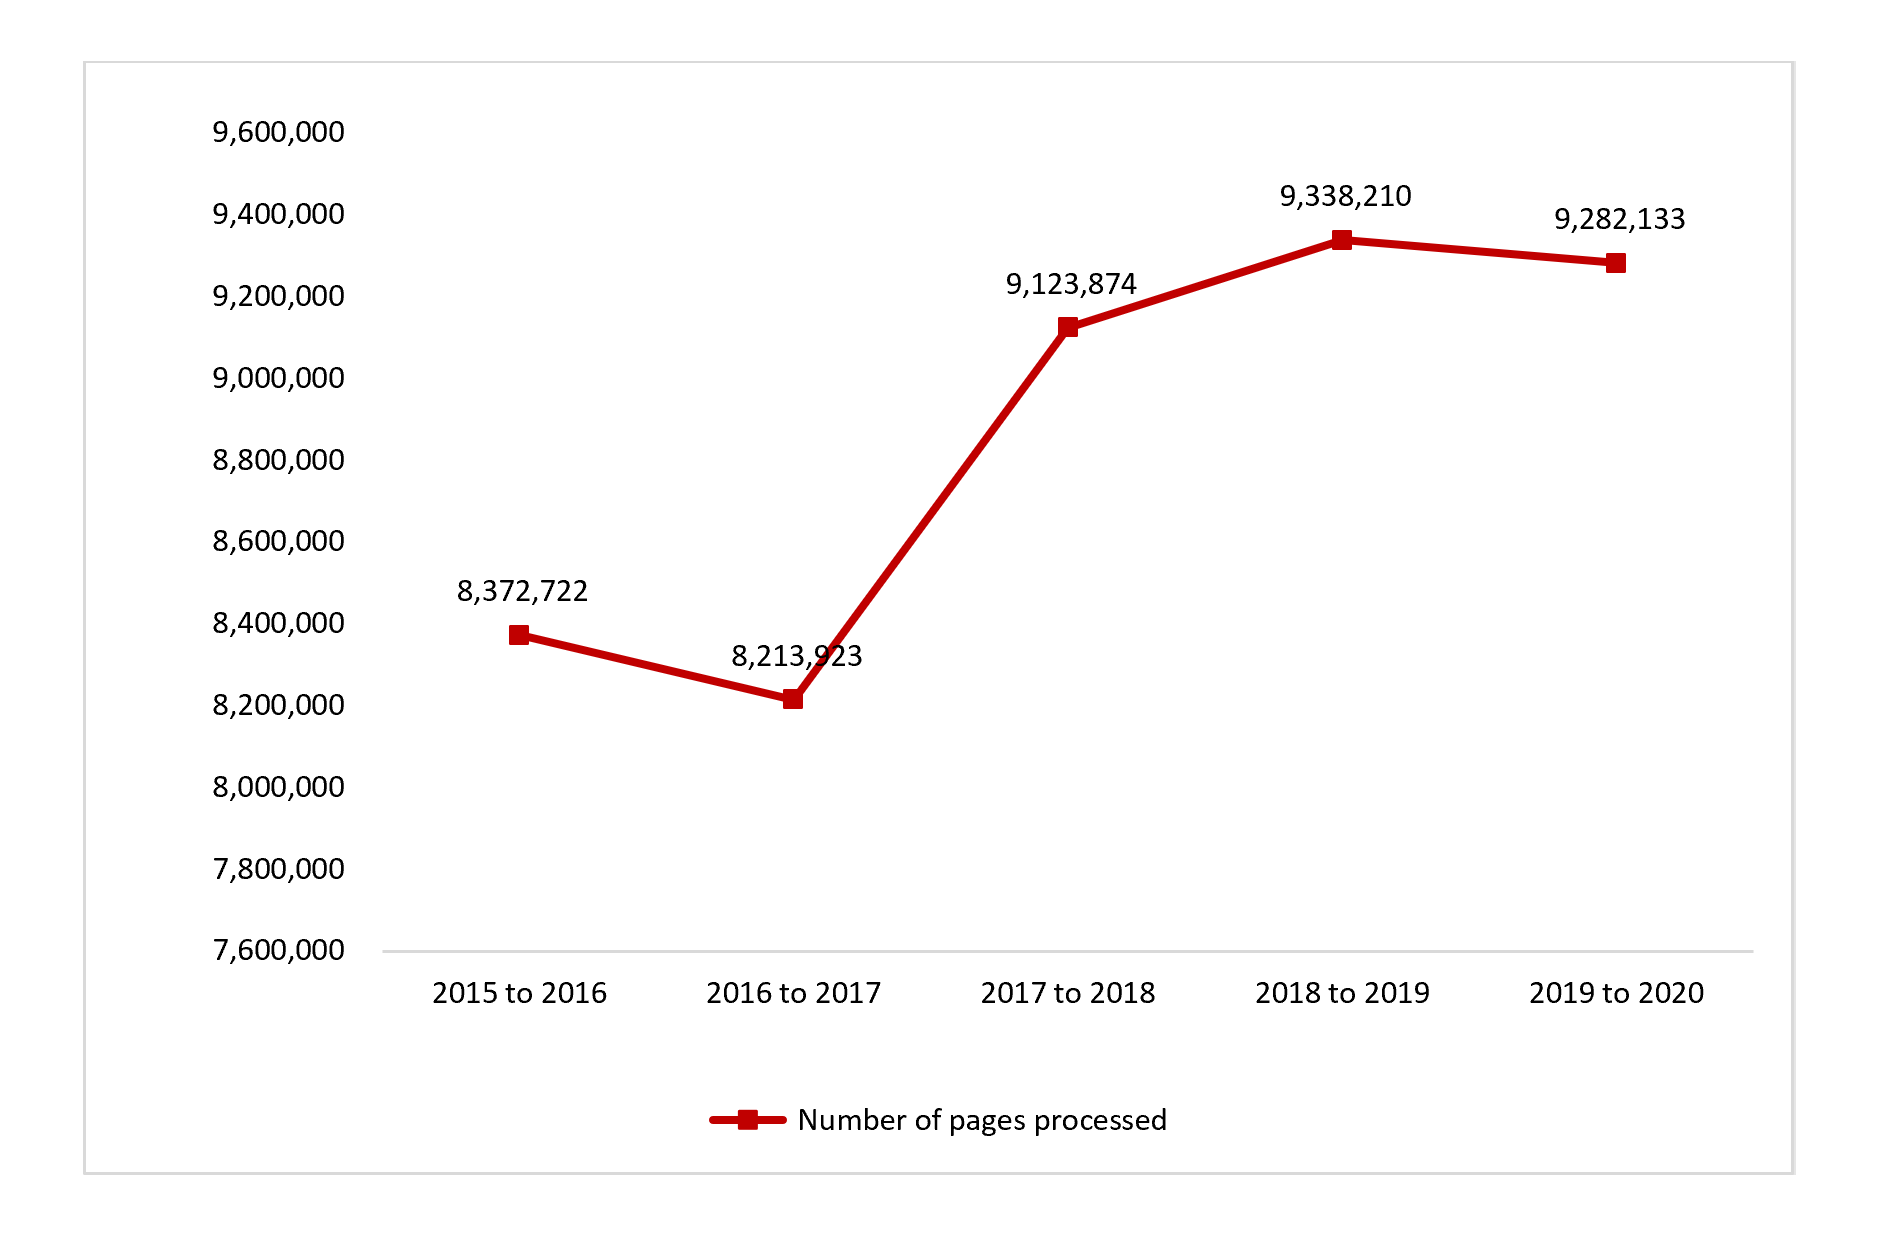 number of pages processed in response to closed personal information requests, from fiscal year 2015 to 2016 to fiscal year 2019 to 2020. Text version below: